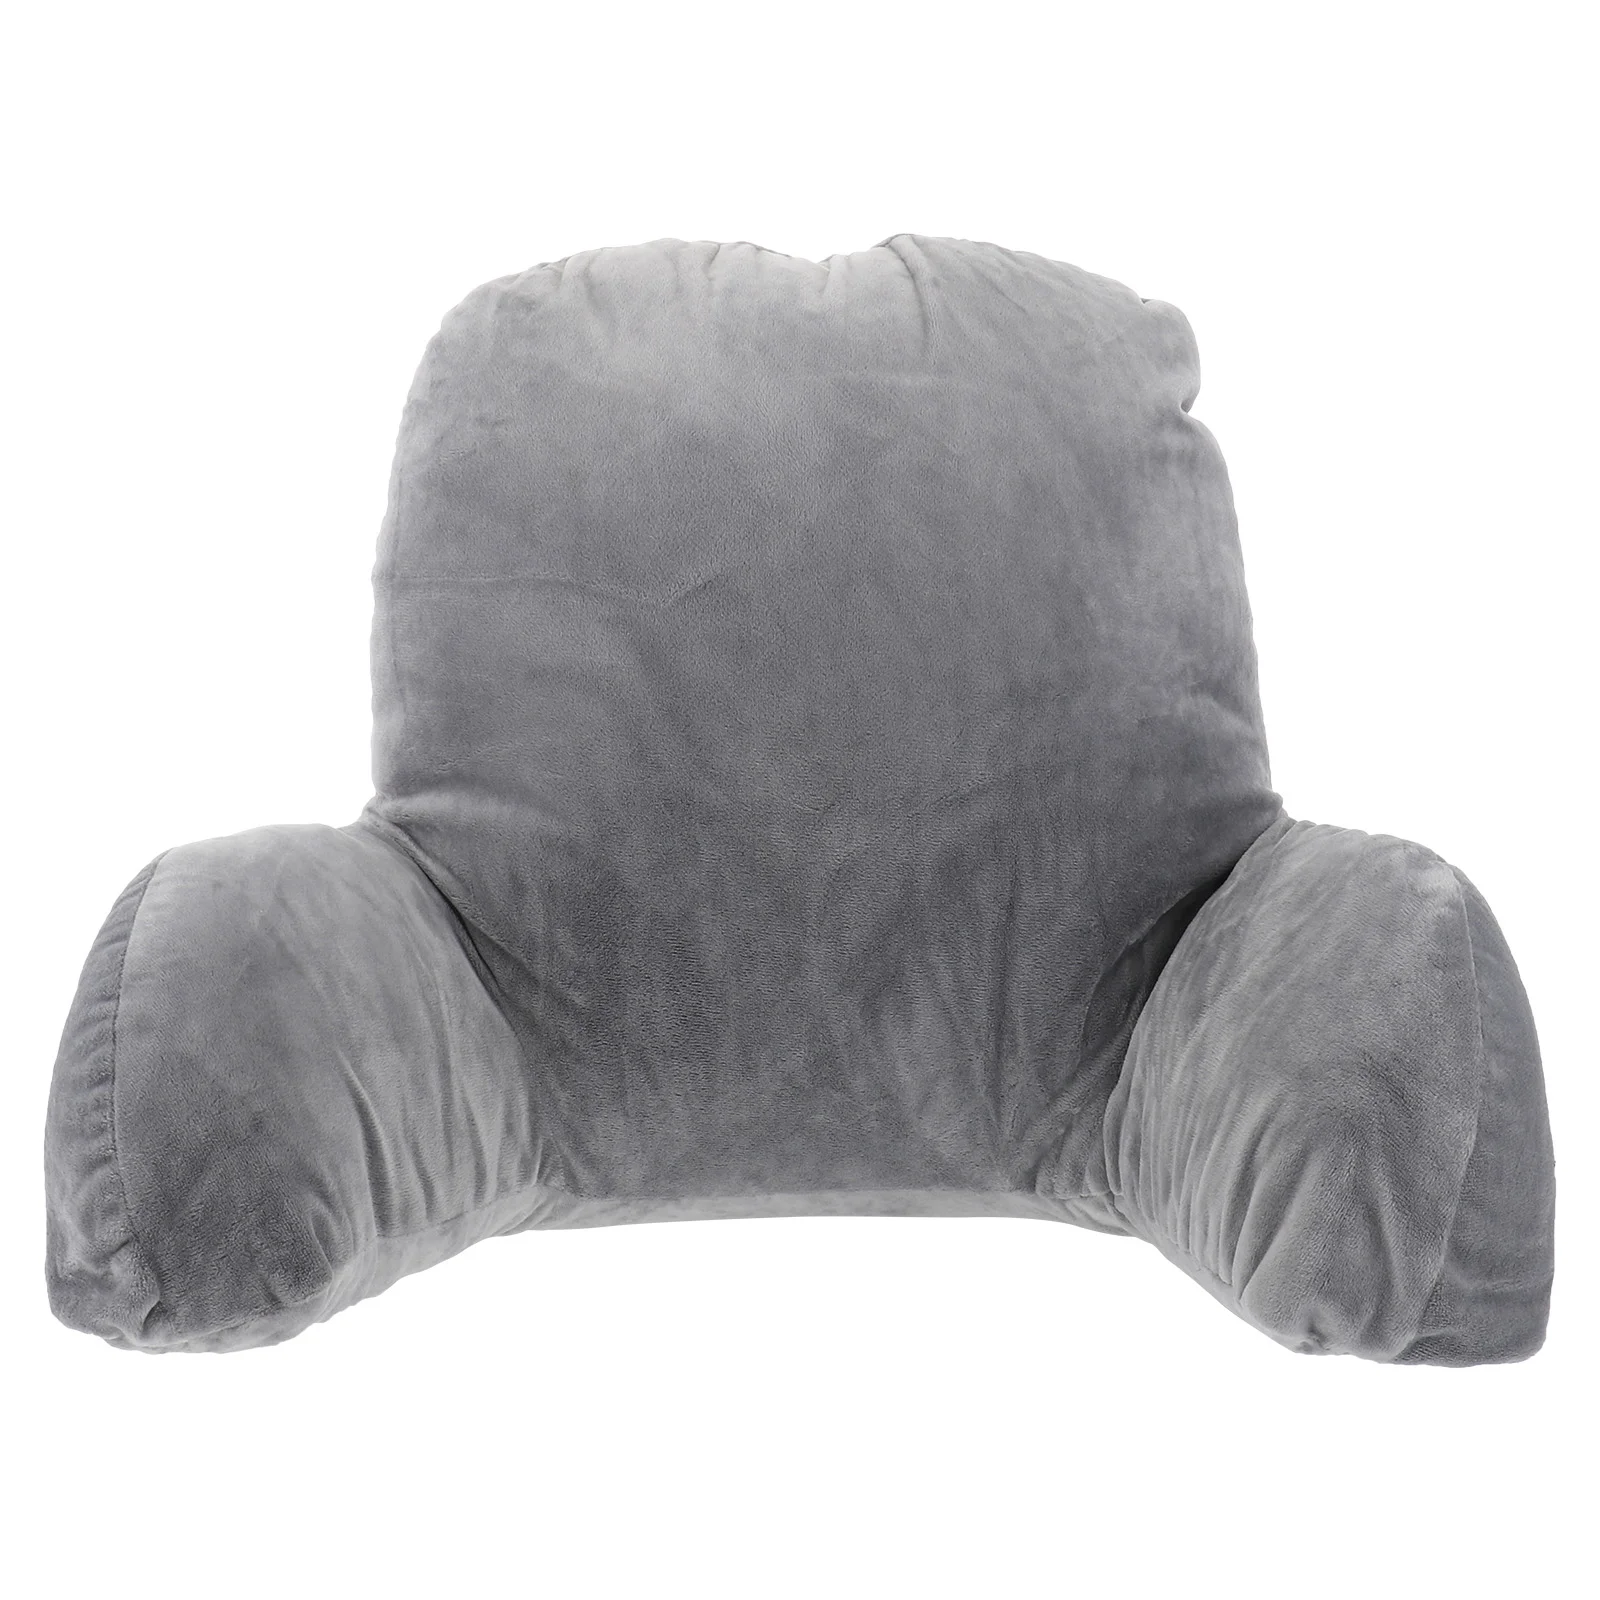 

Pillow Bed Reading Backrest Cushion Support Lumbar Chair Pillows Sitting Rest Wedge Up Adult Car Arms Sit Lounger Foam Cotton